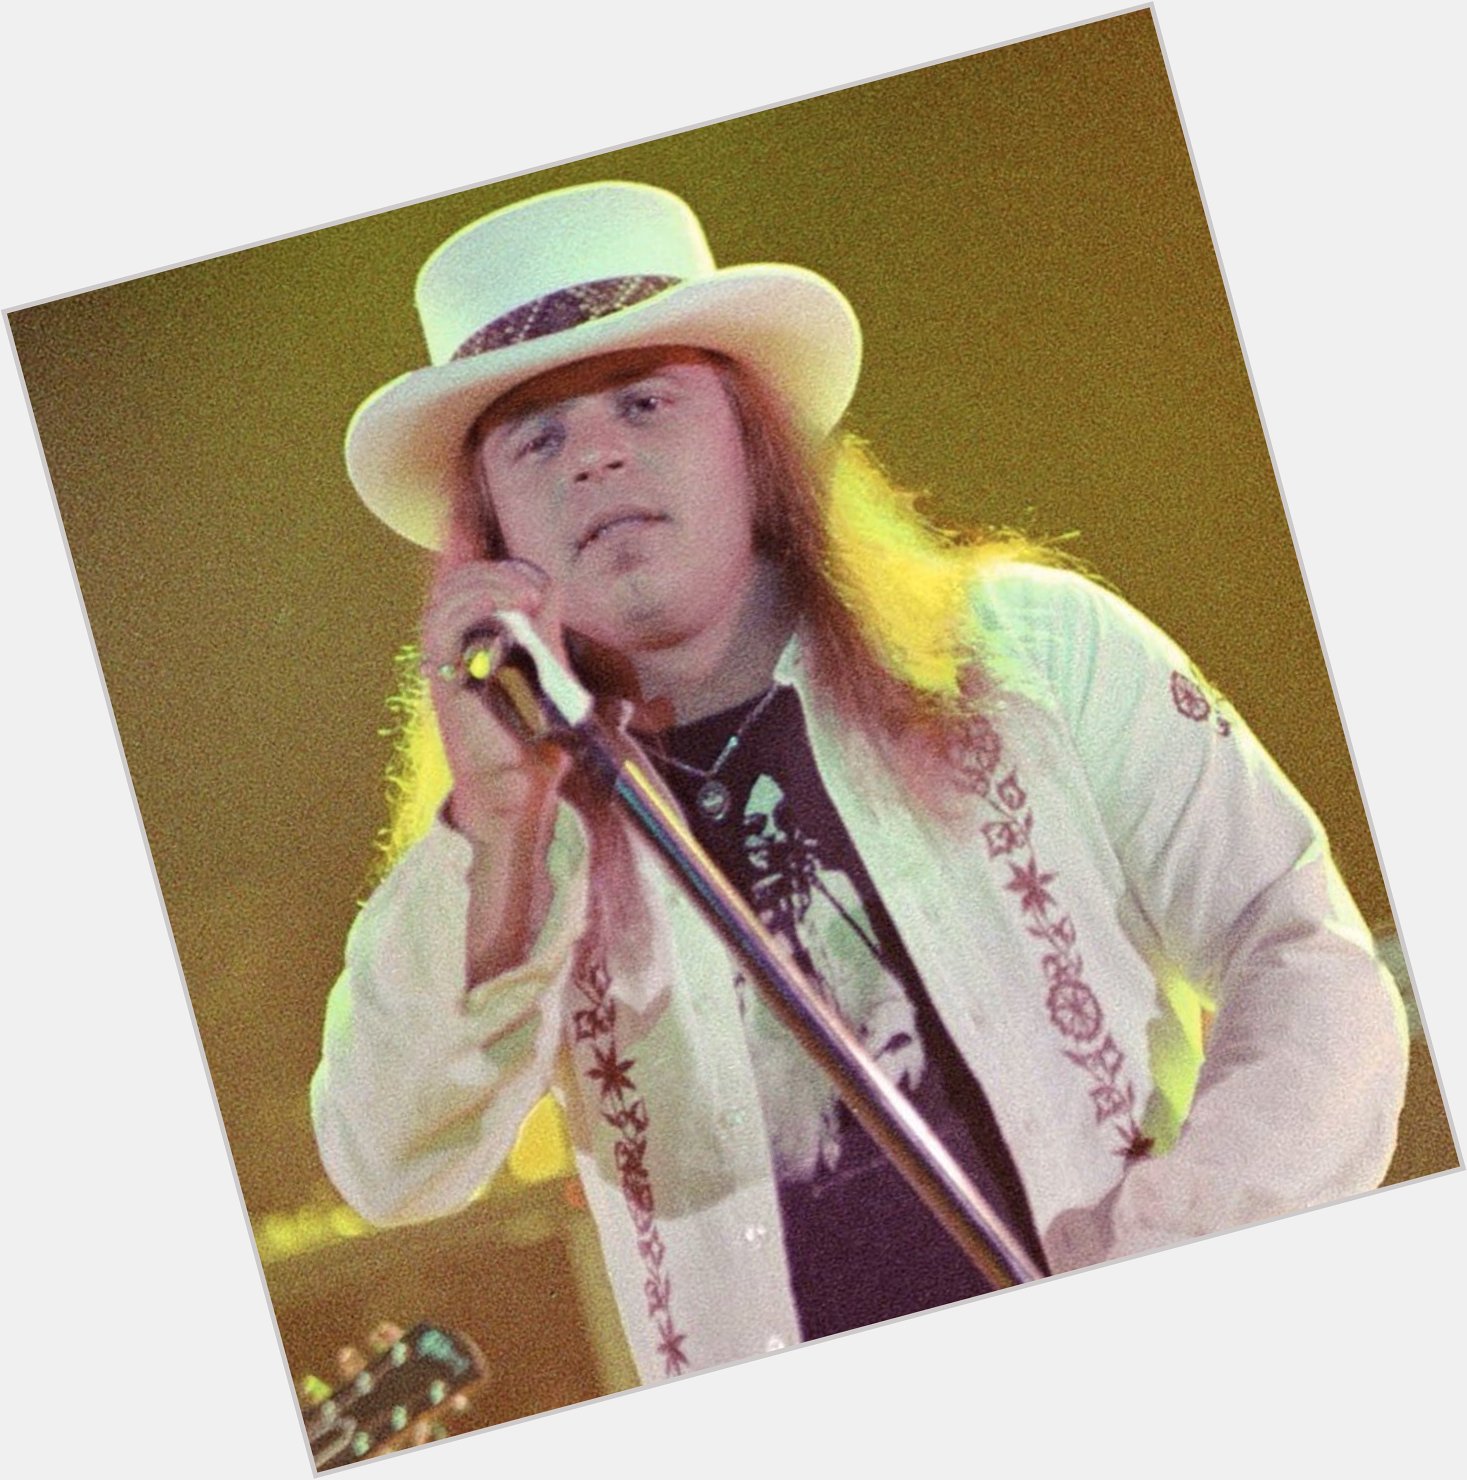 Happy Birthday Ronnie Van Zant  ,  would have been 72 today  free bird  !!    